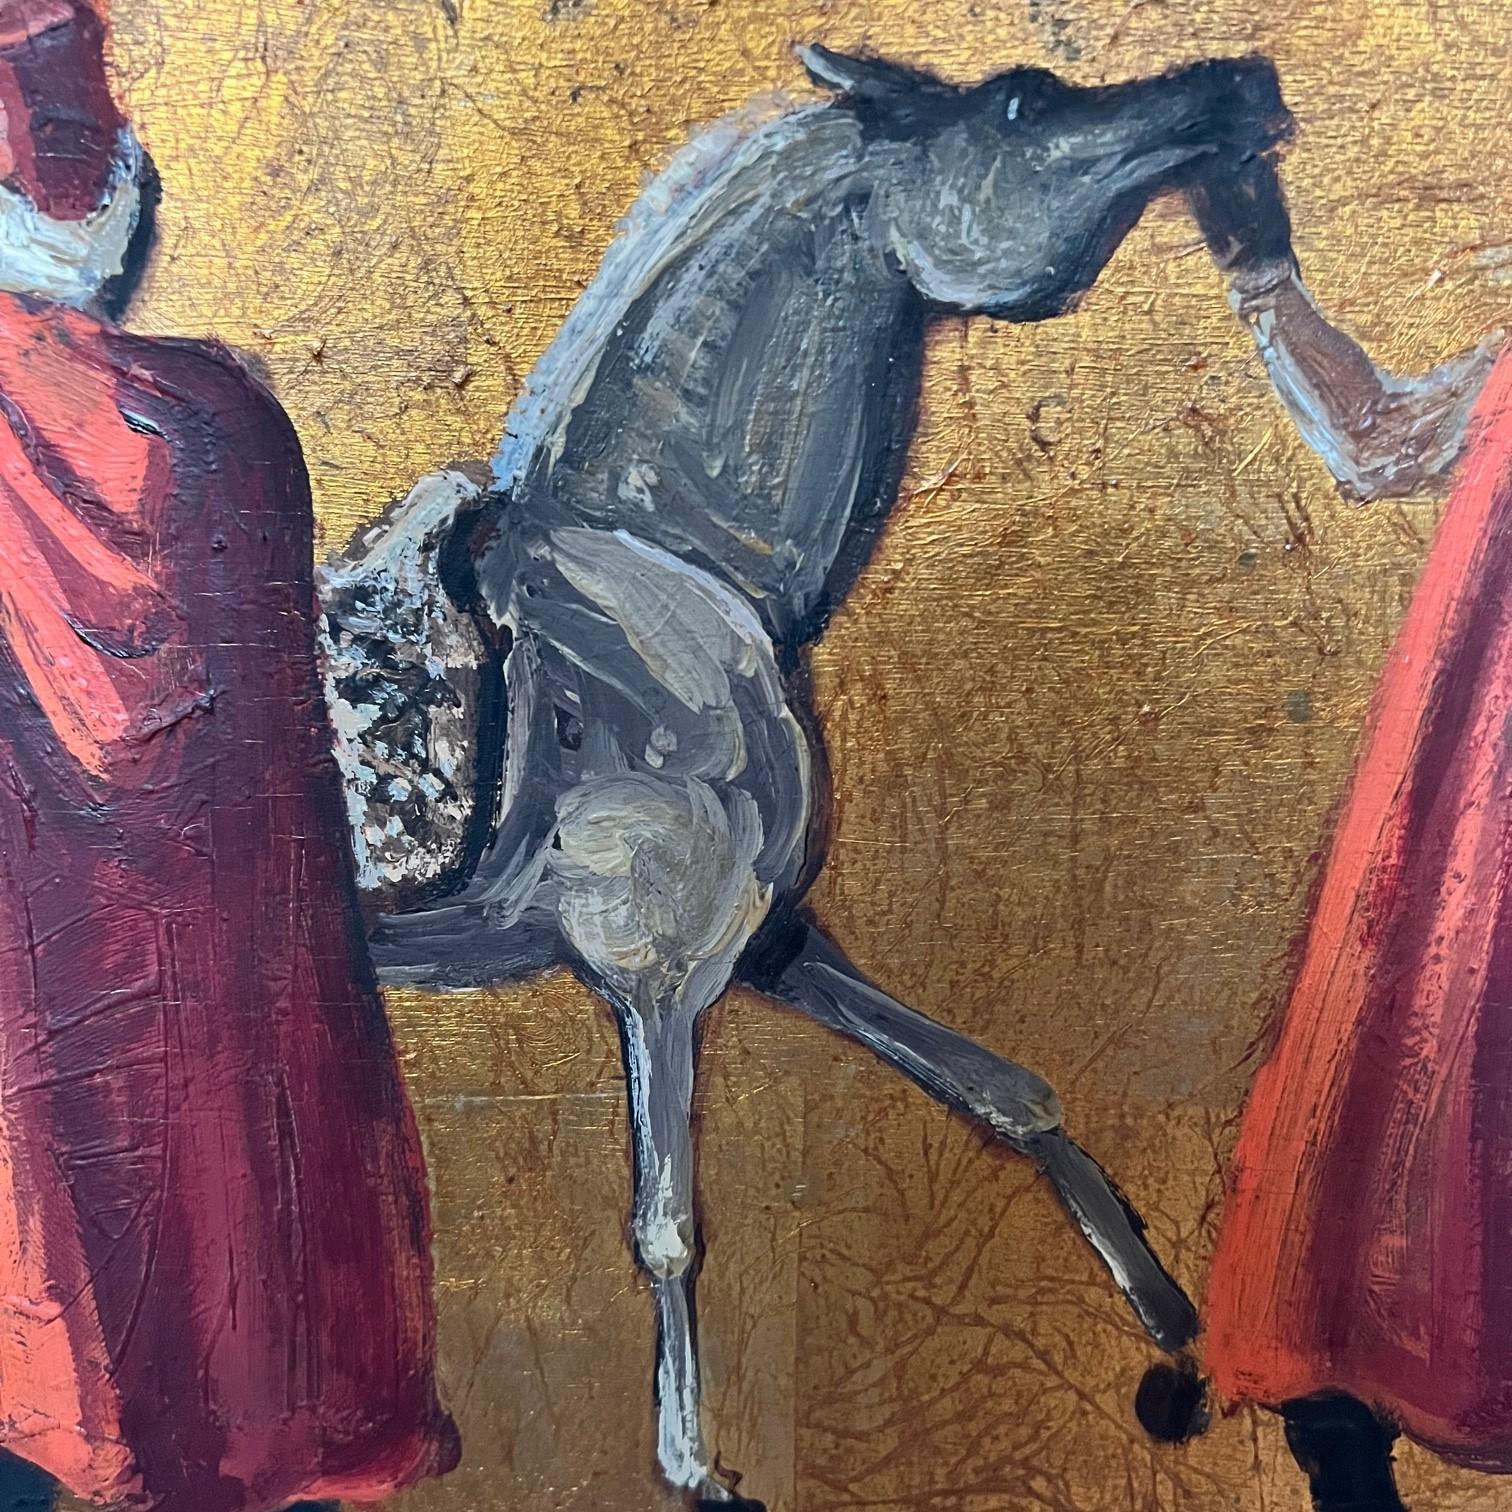 Tunisian 1950s Art Deco Style Figurative Painting with Horses by Porter Woodruff, Framed For Sale